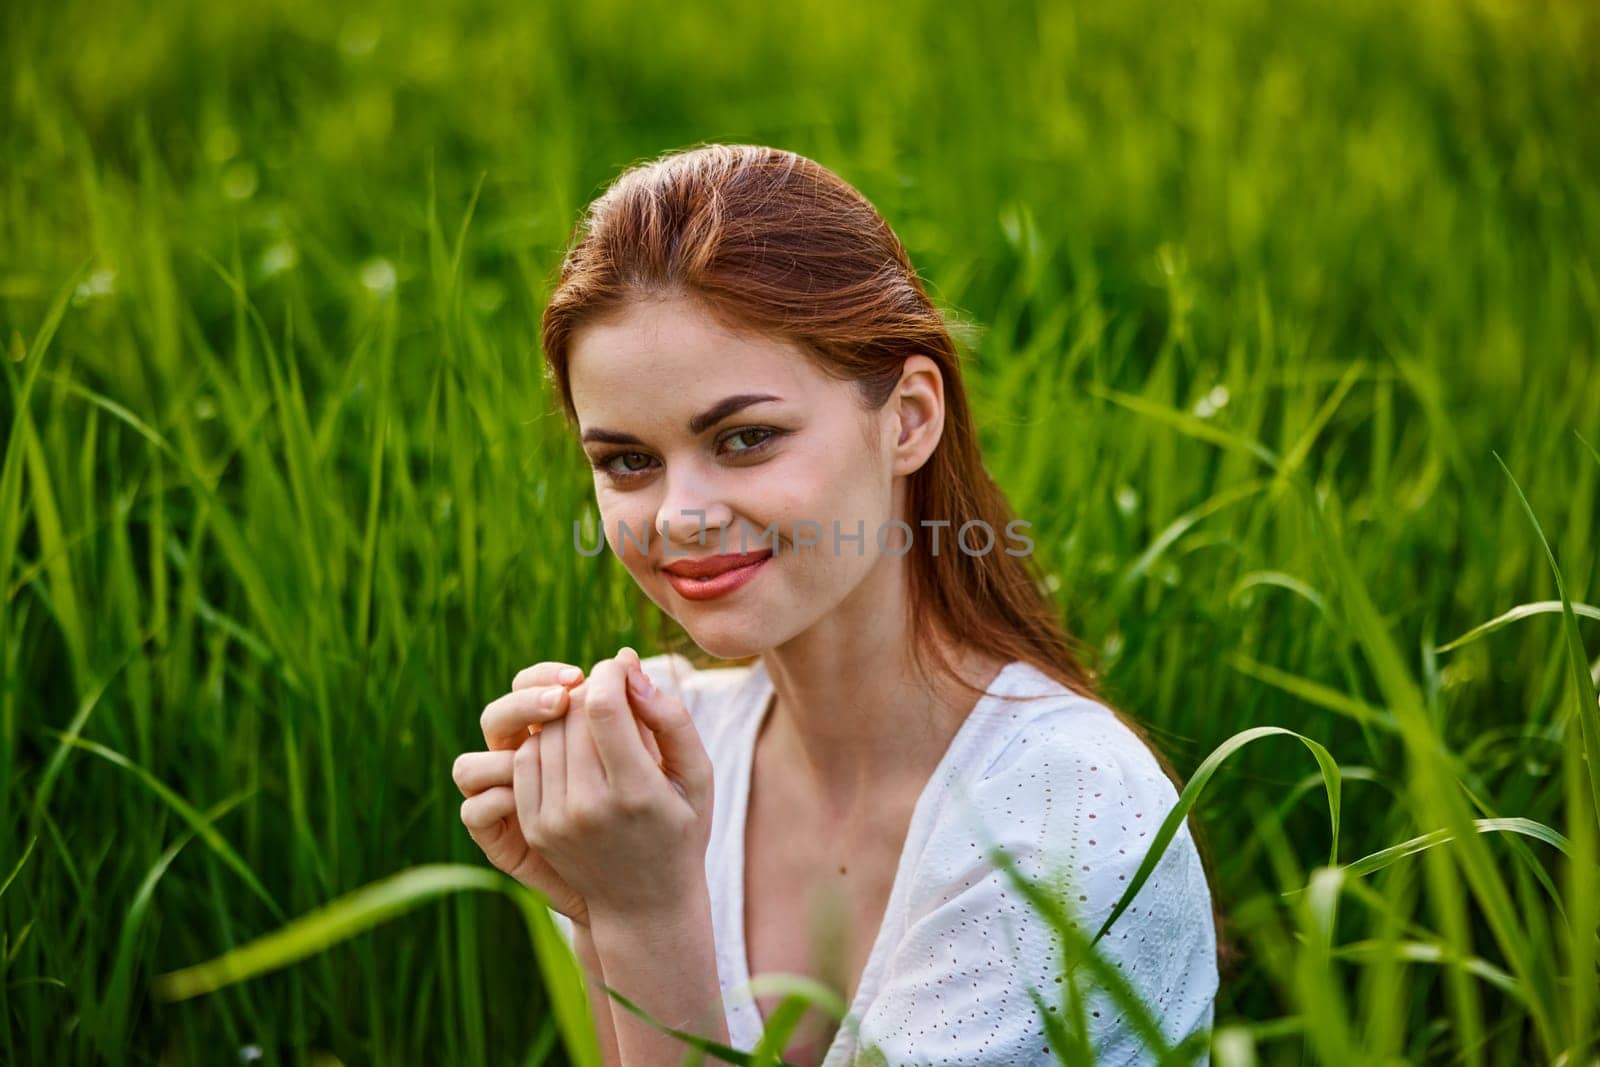 cute, happy woman sitting in tall grass on a sunny day in a light dress. High quality photo